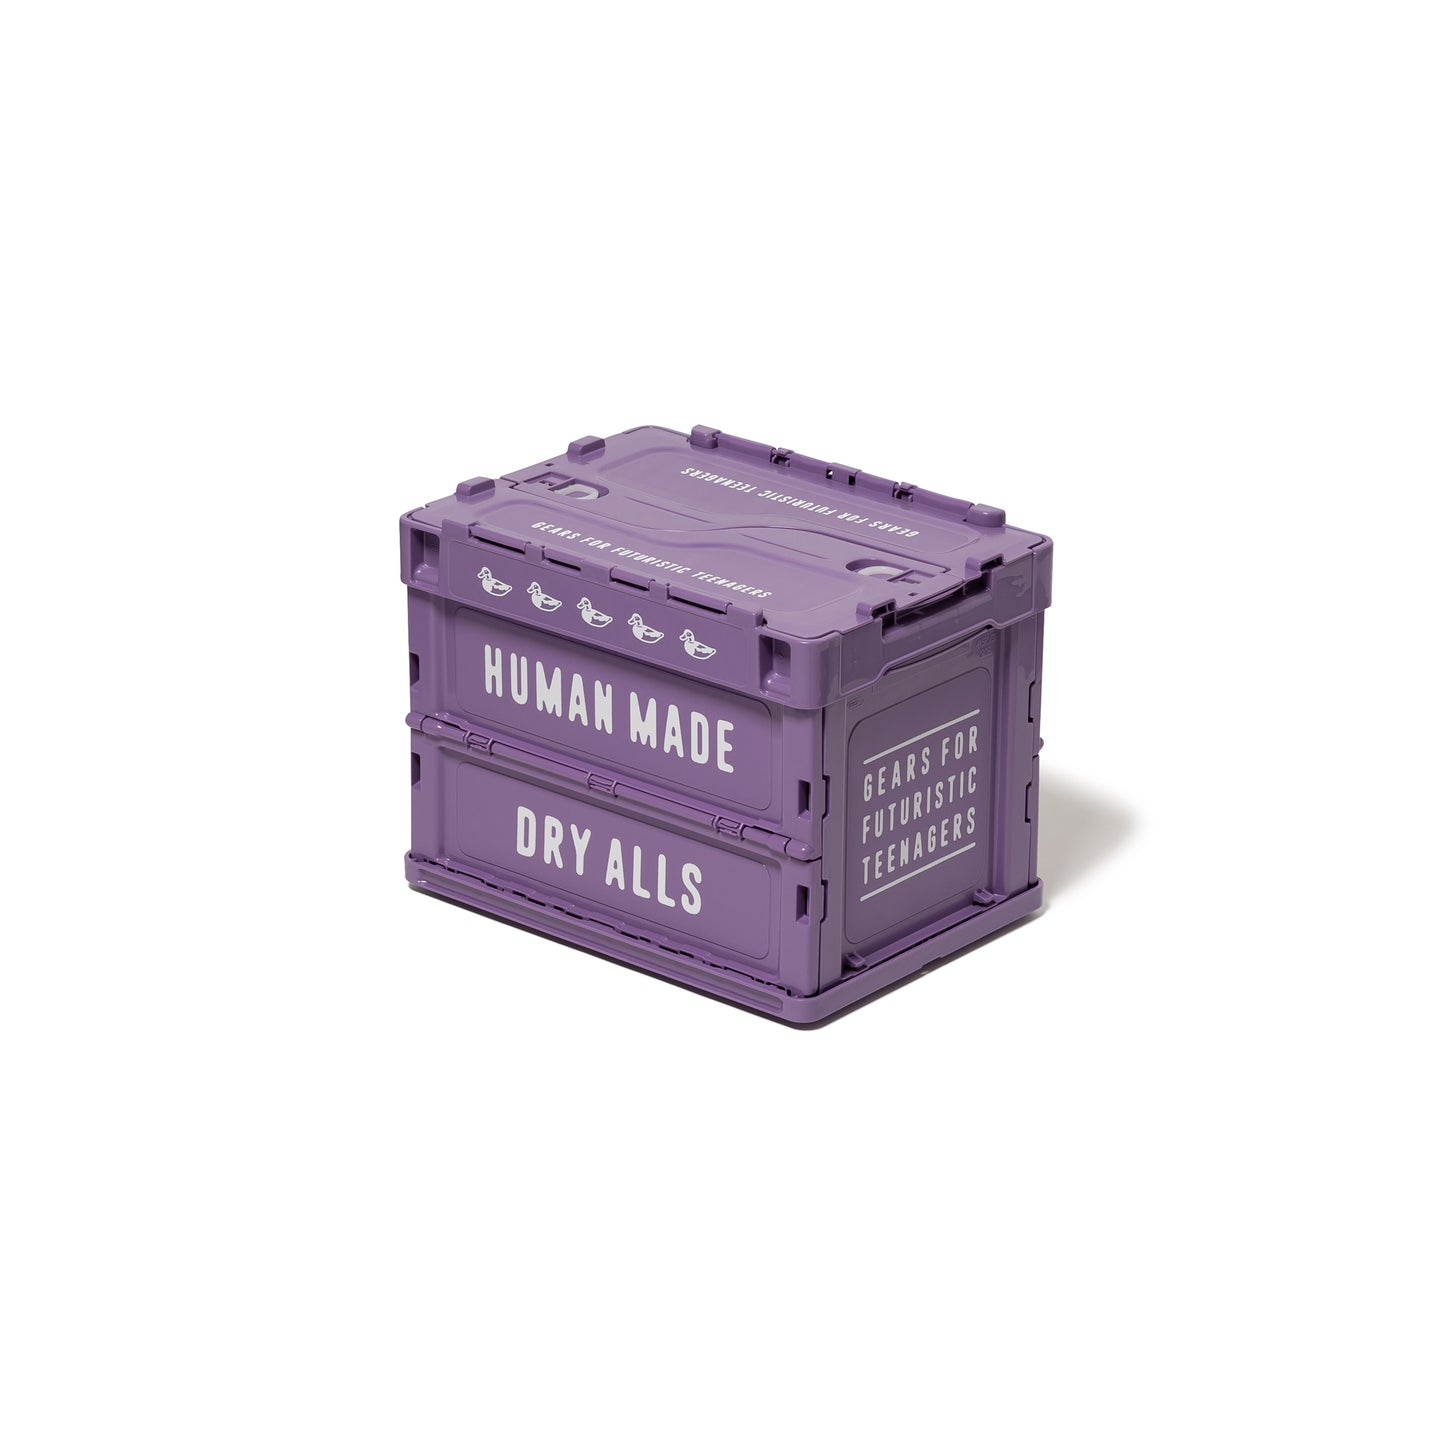 HUMAN MADE CONTAINER 20L